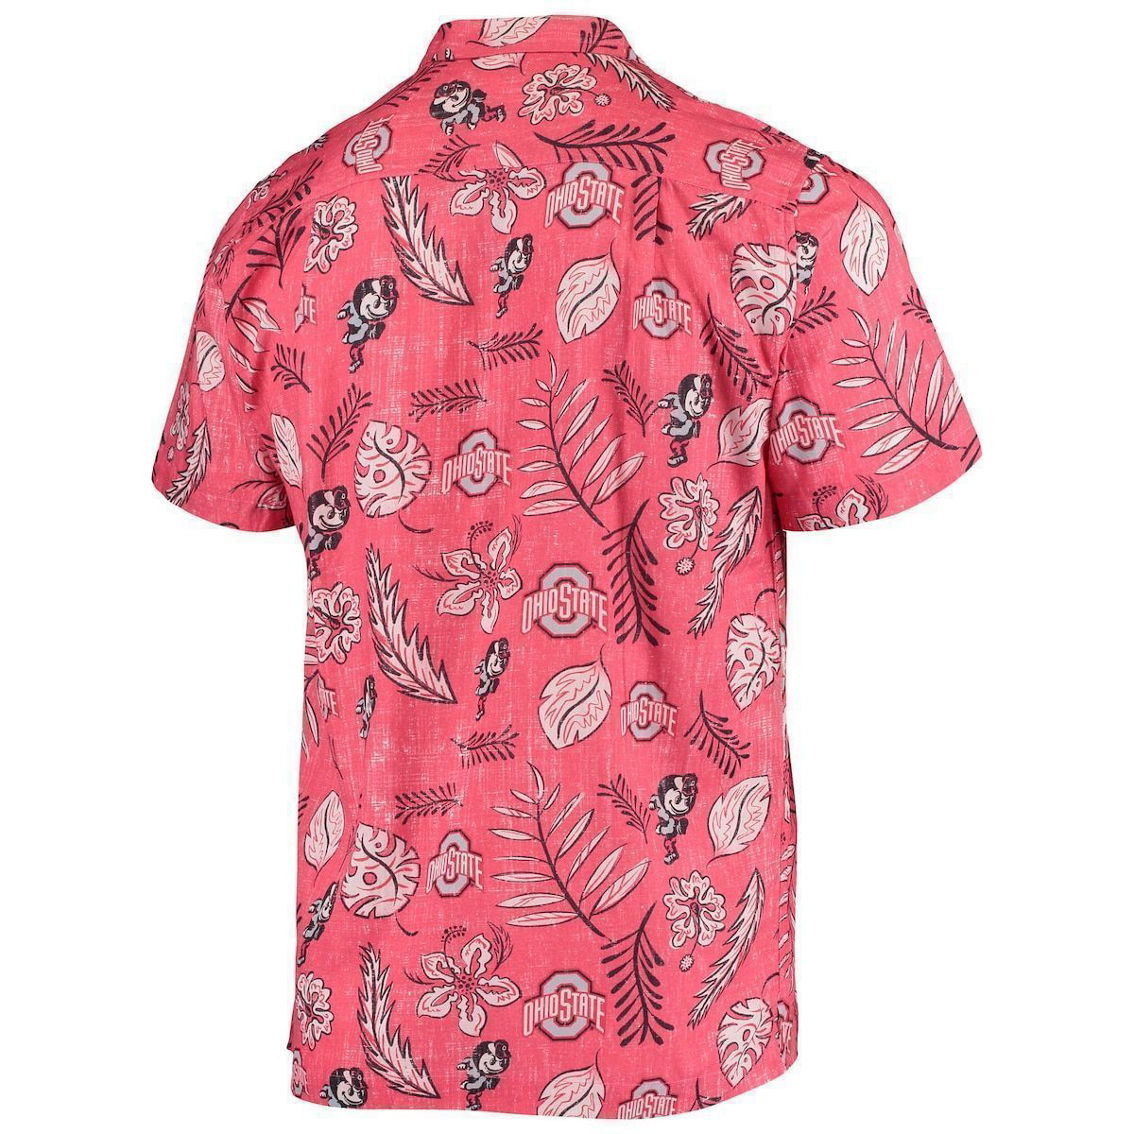 Wes & Willy Men's Scarlet Ohio State Buckeyes Vintage Floral Button-Up Shirt - Image 4 of 4